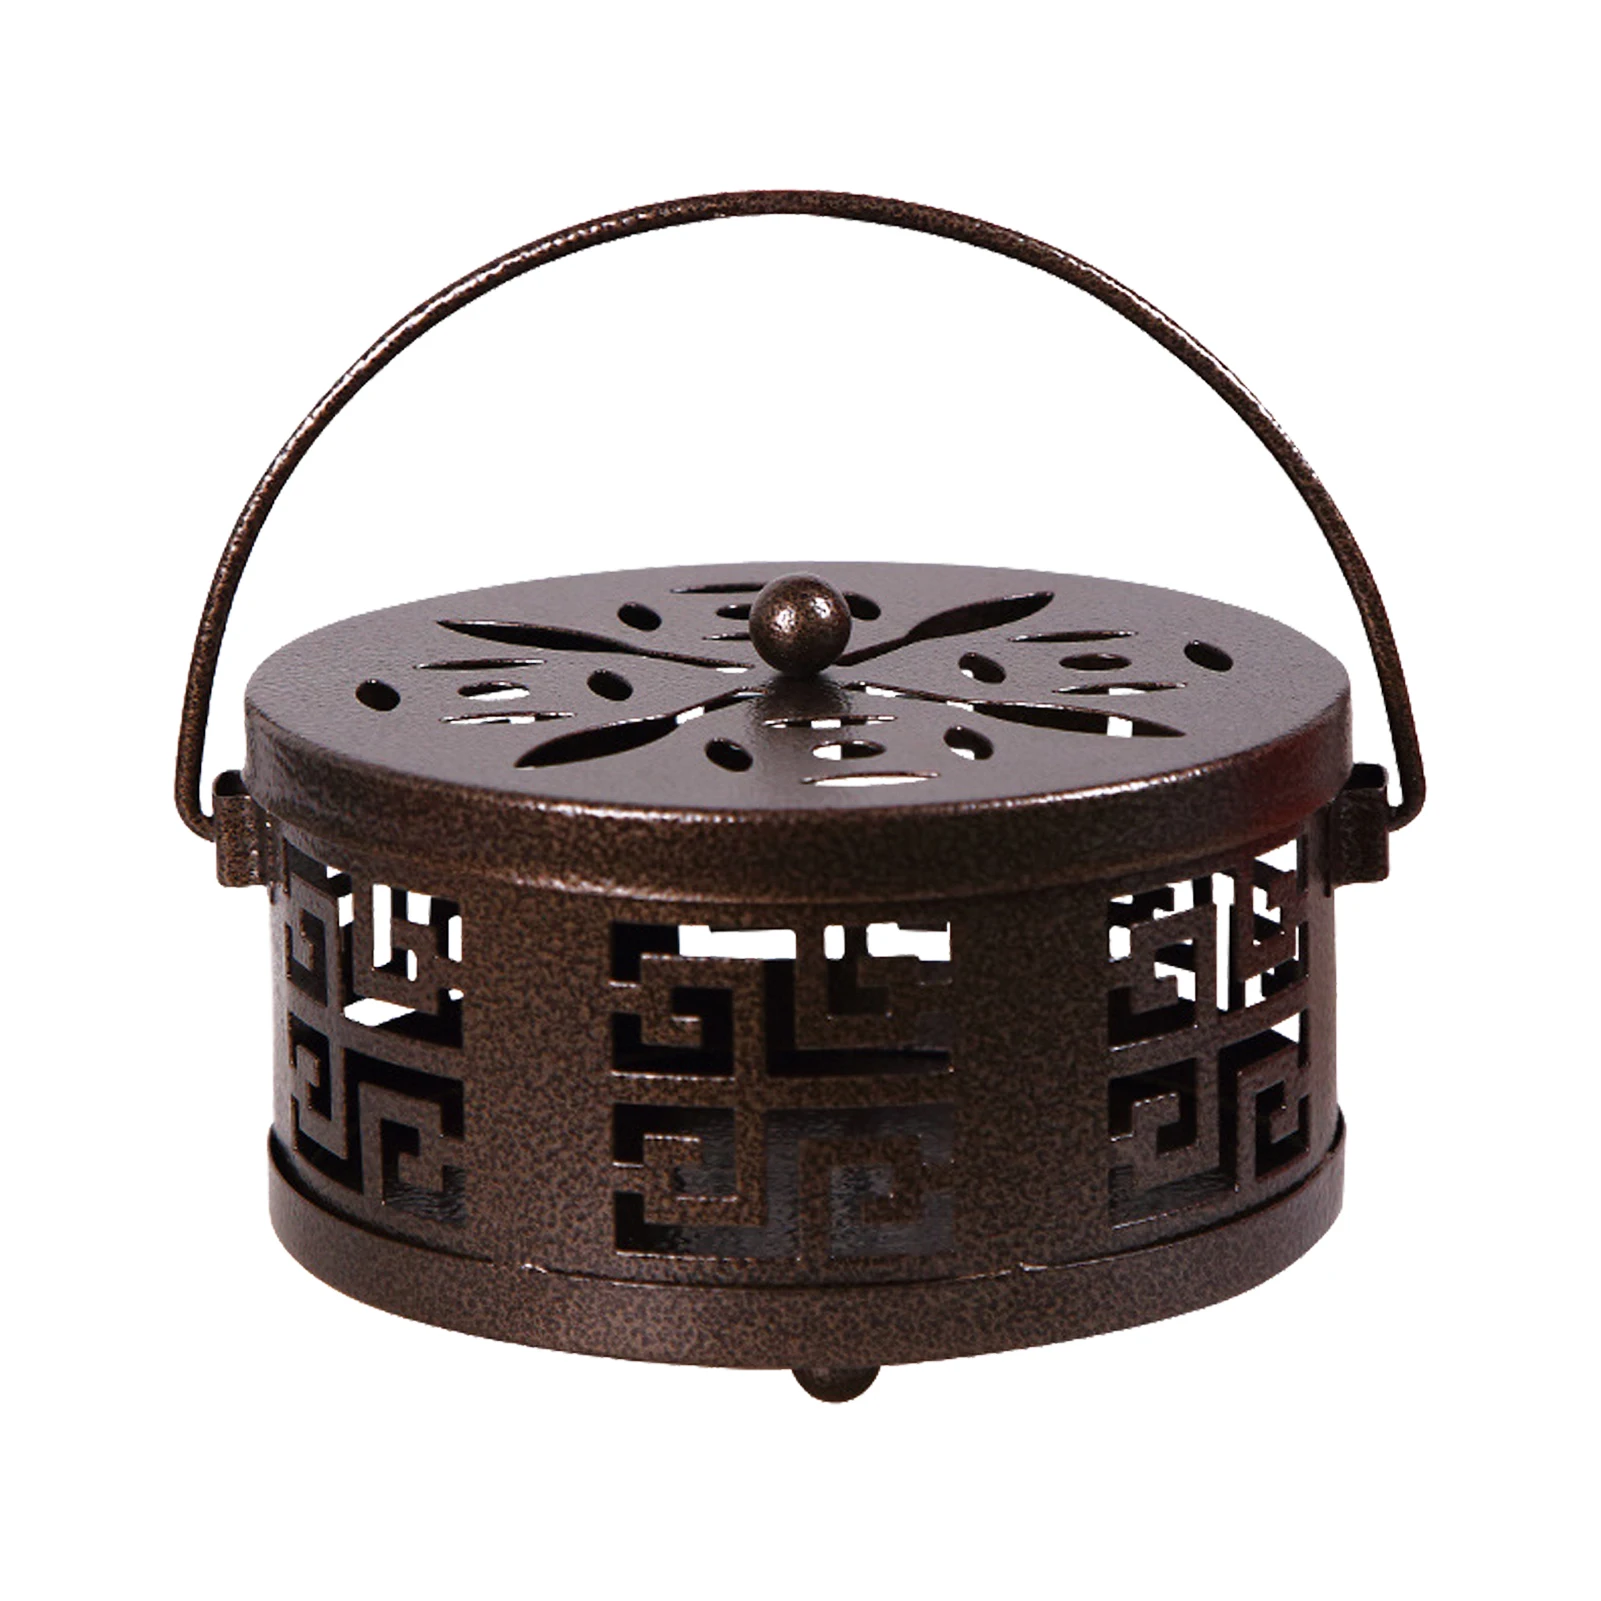 

Indoor Outdoor Home Office Round Iron Mosquito Coil Holder Incense Burner Fire Prevention Repellent Portable Anti Scald With Lid